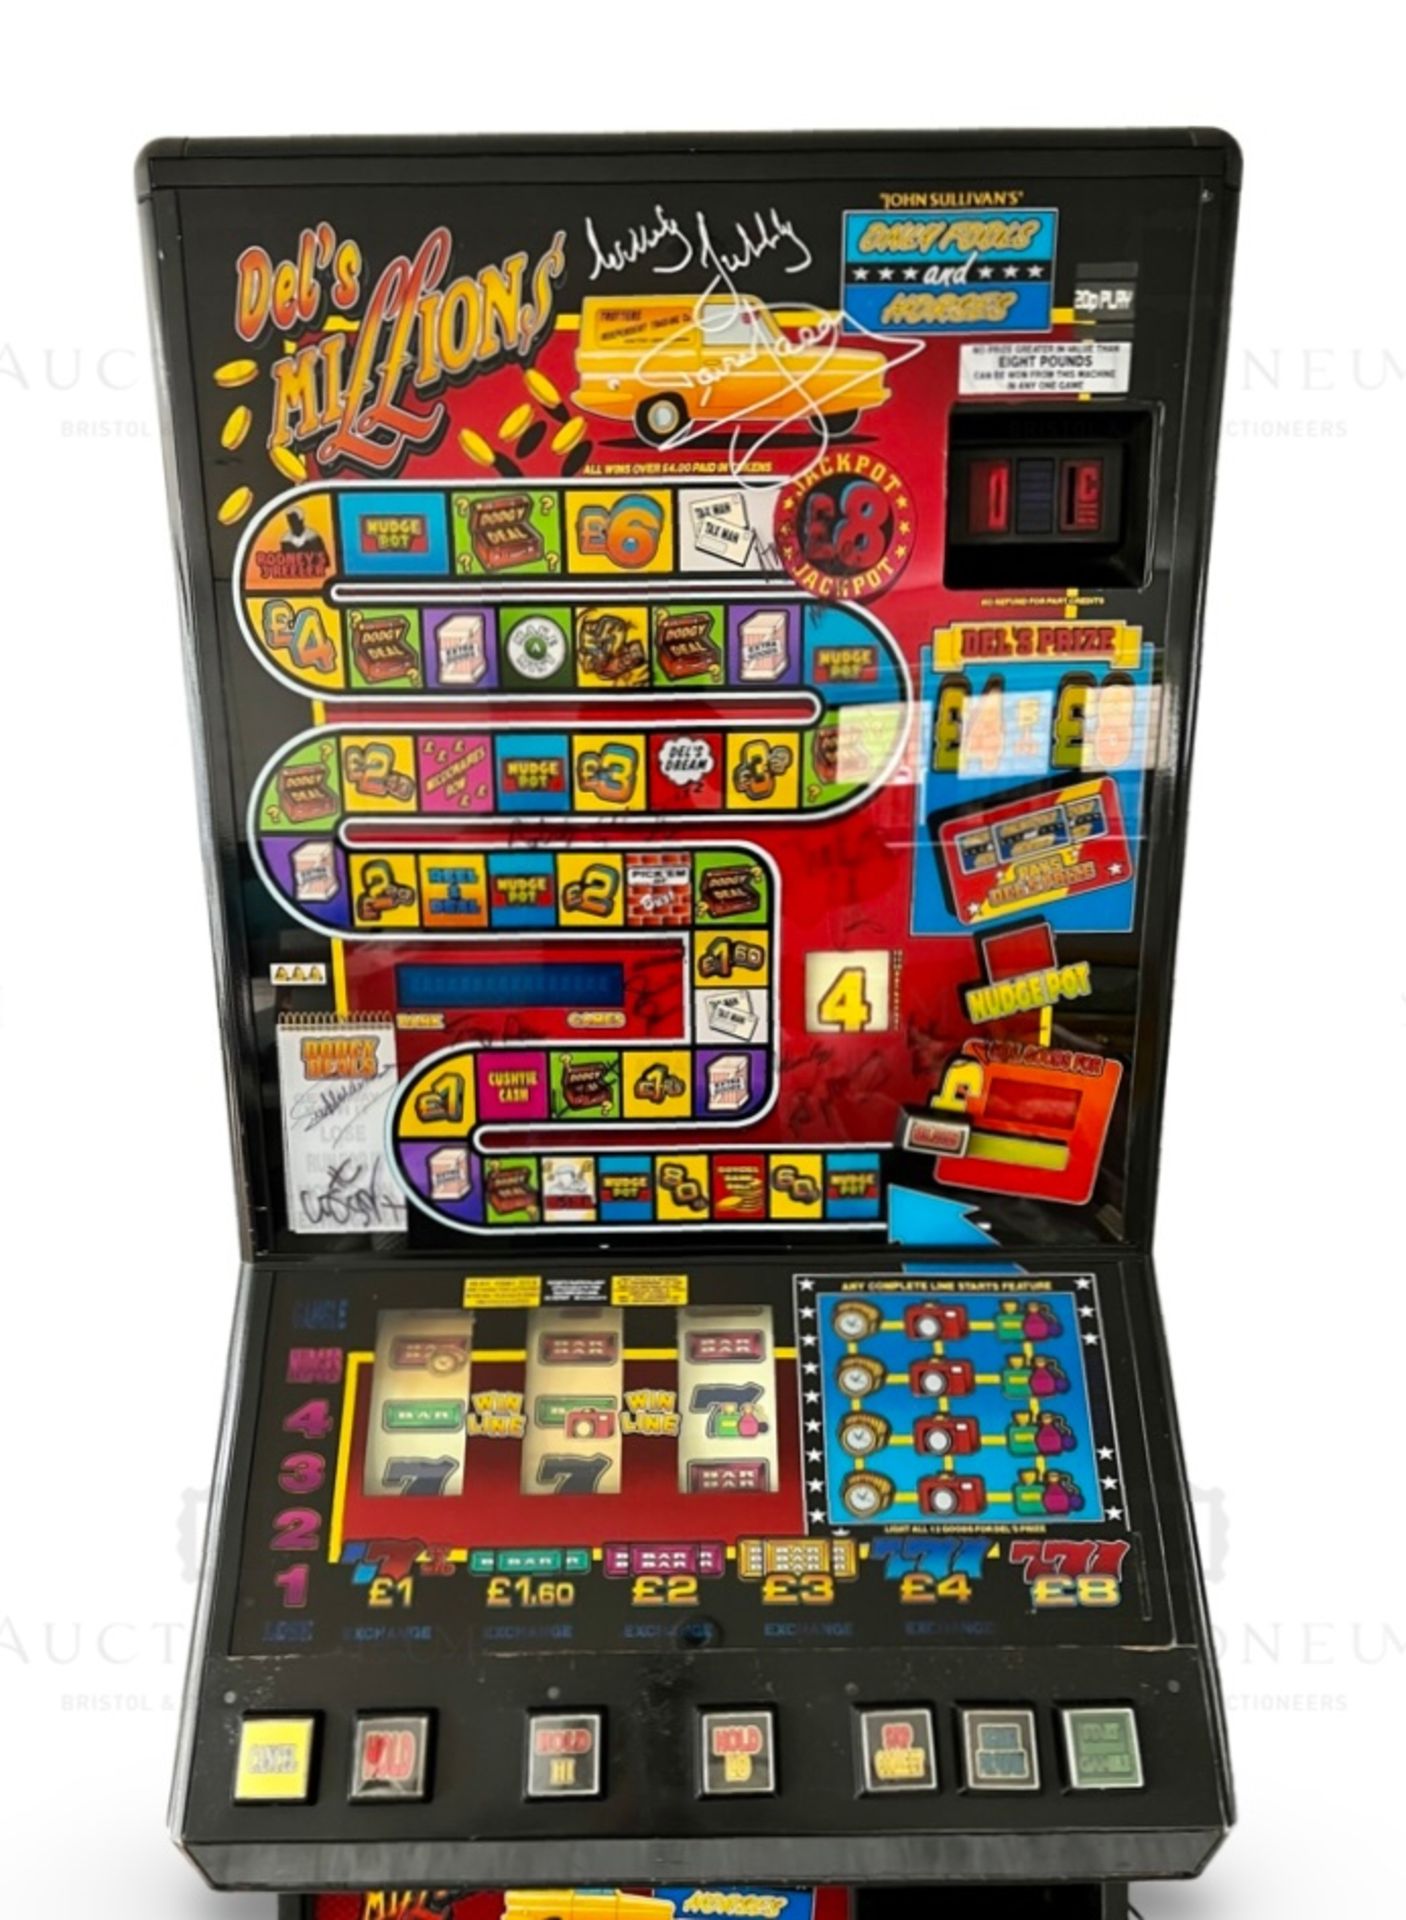 ONLY FOOLS & HORSES - SCARCE 'DEL'S MILLIONS' FRUIT MACHINE - SIGNED - Image 14 of 18